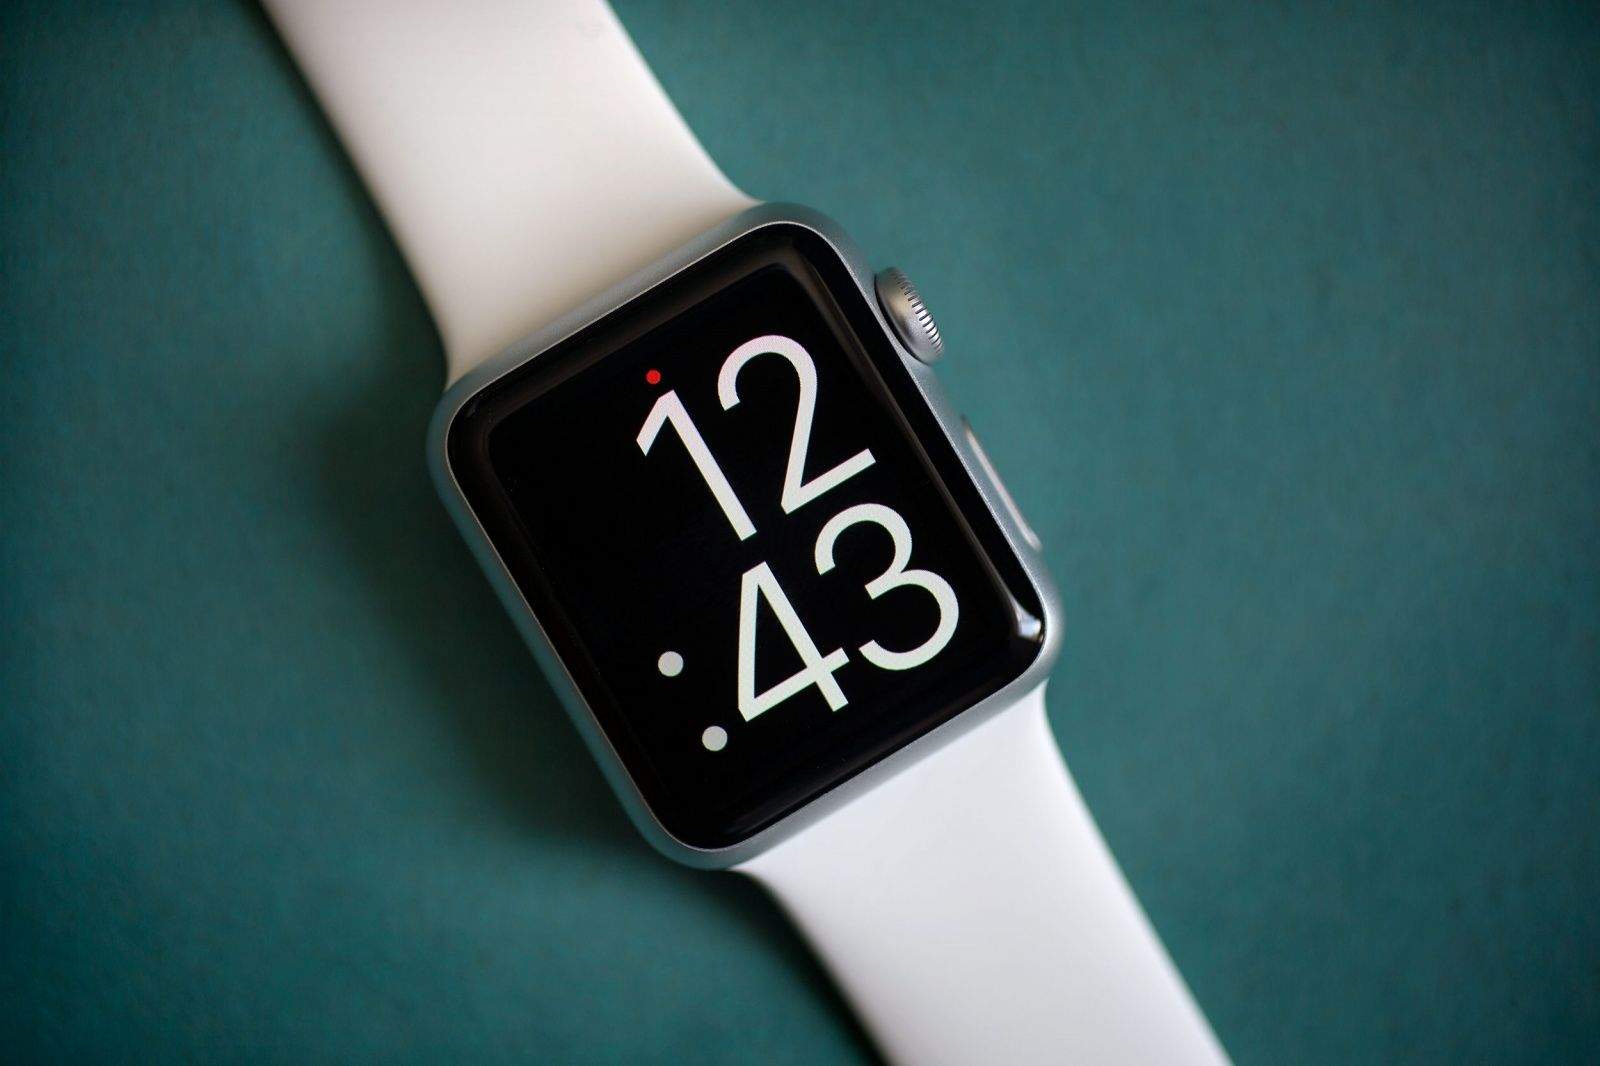 How To Change Clock On Apple Watch To Digital